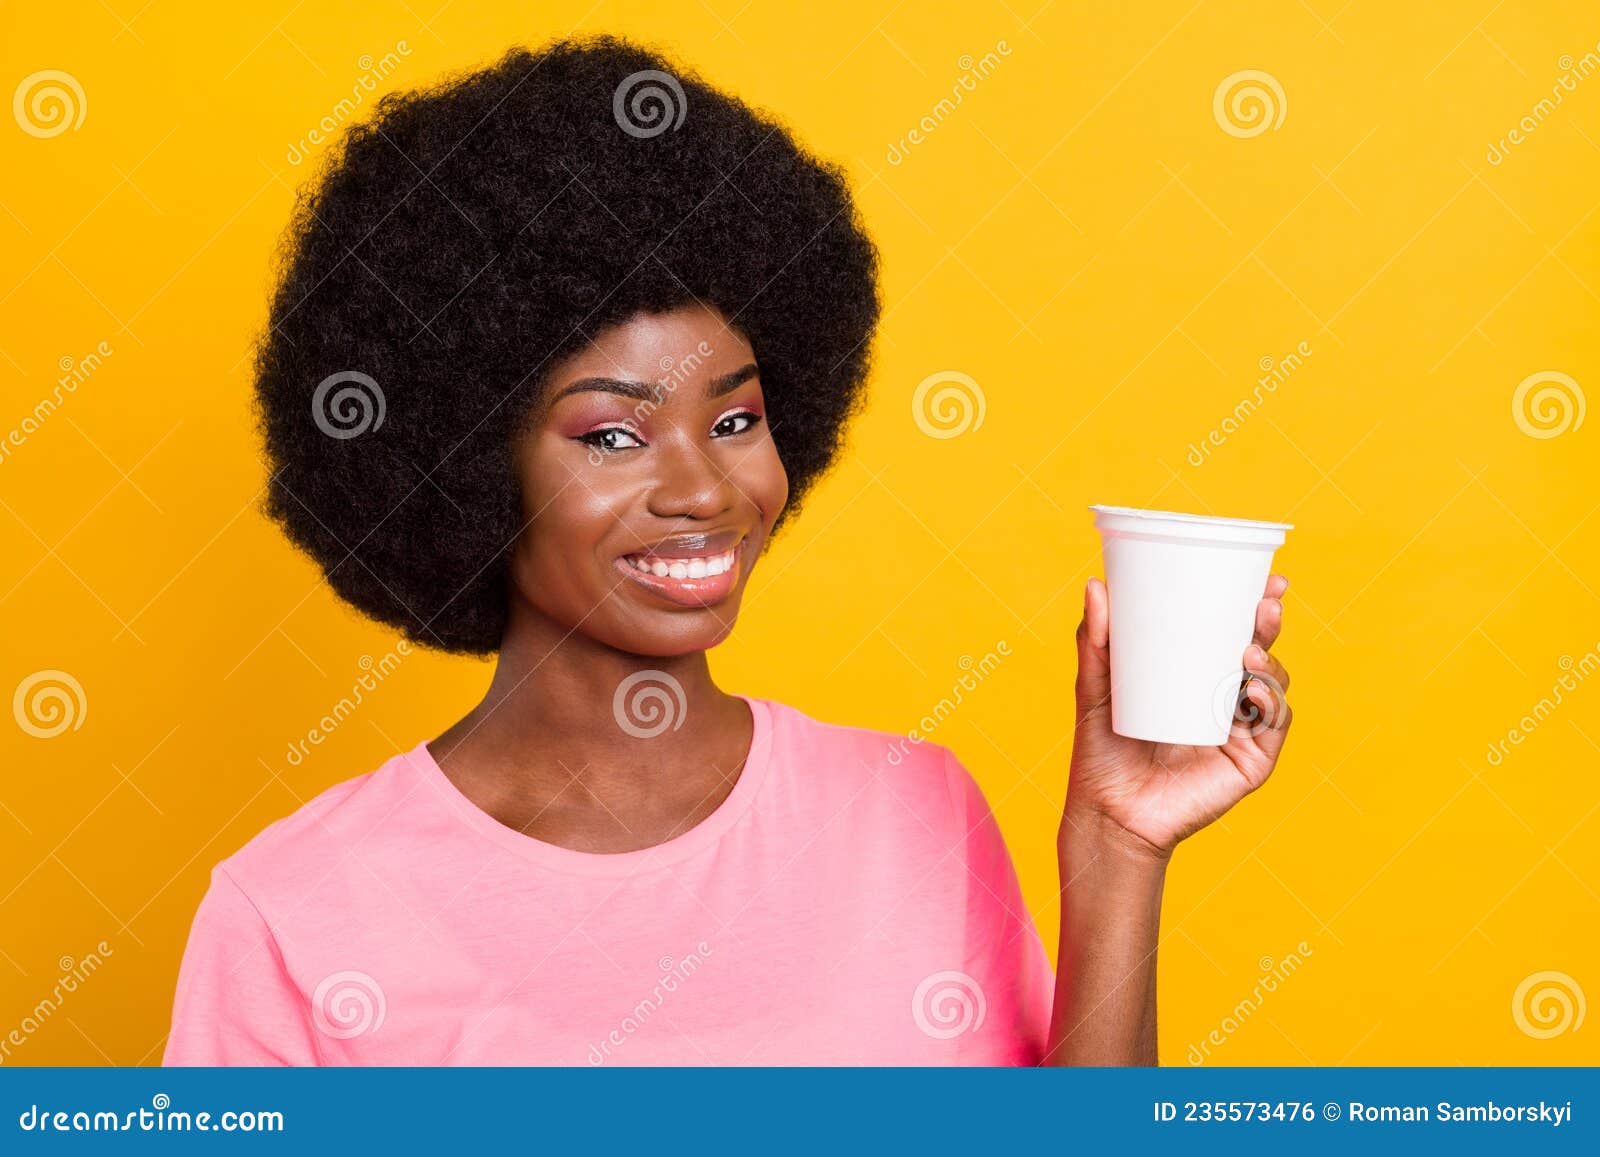 photo of young black girl happy positive smile show advise suggest pomo food product  over yellow color